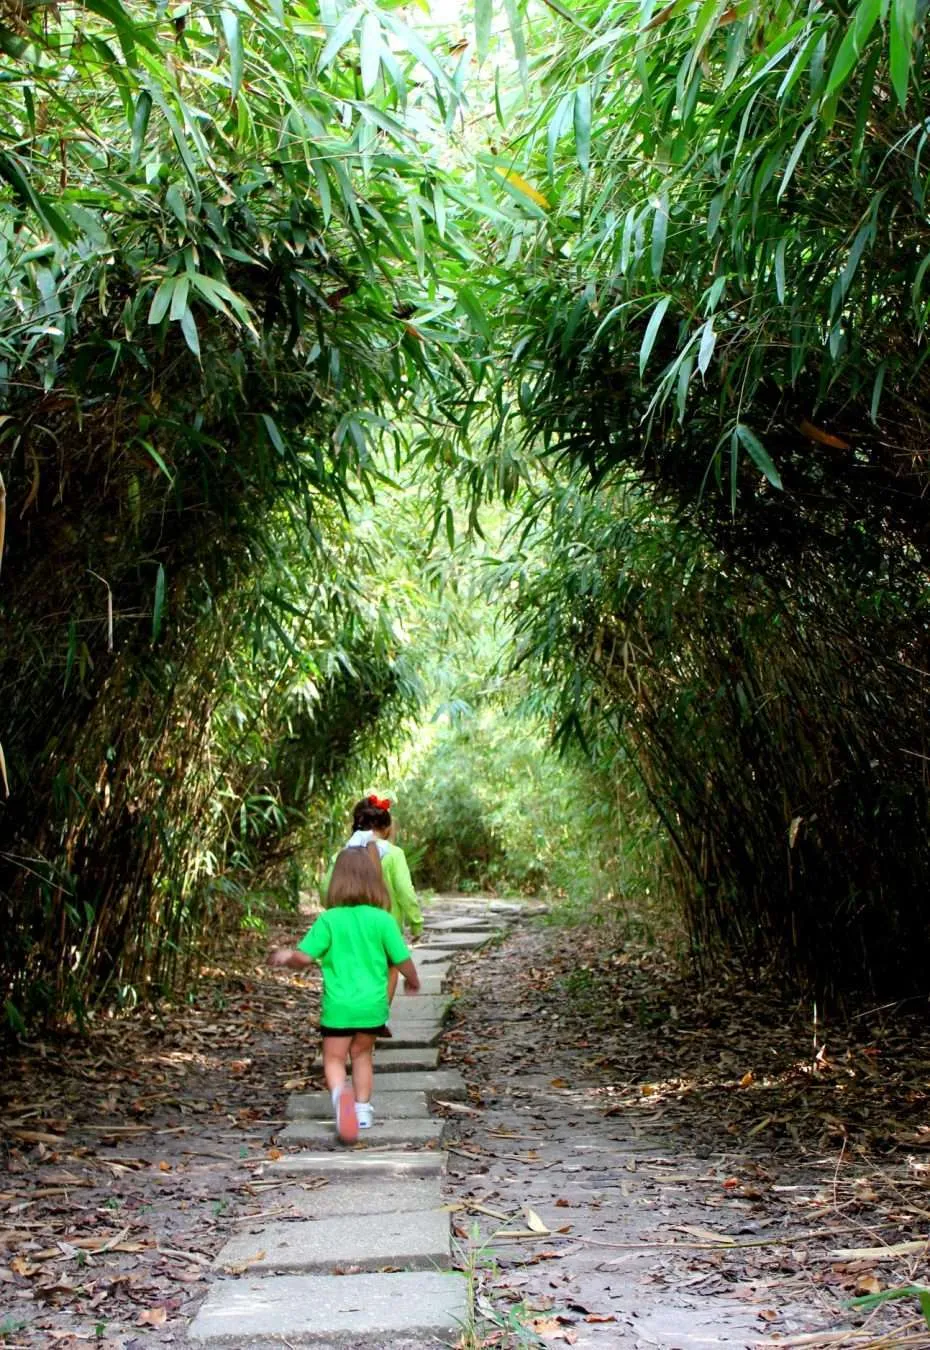 The kids running through the bamboo 'forest' at Jungle Gardens.